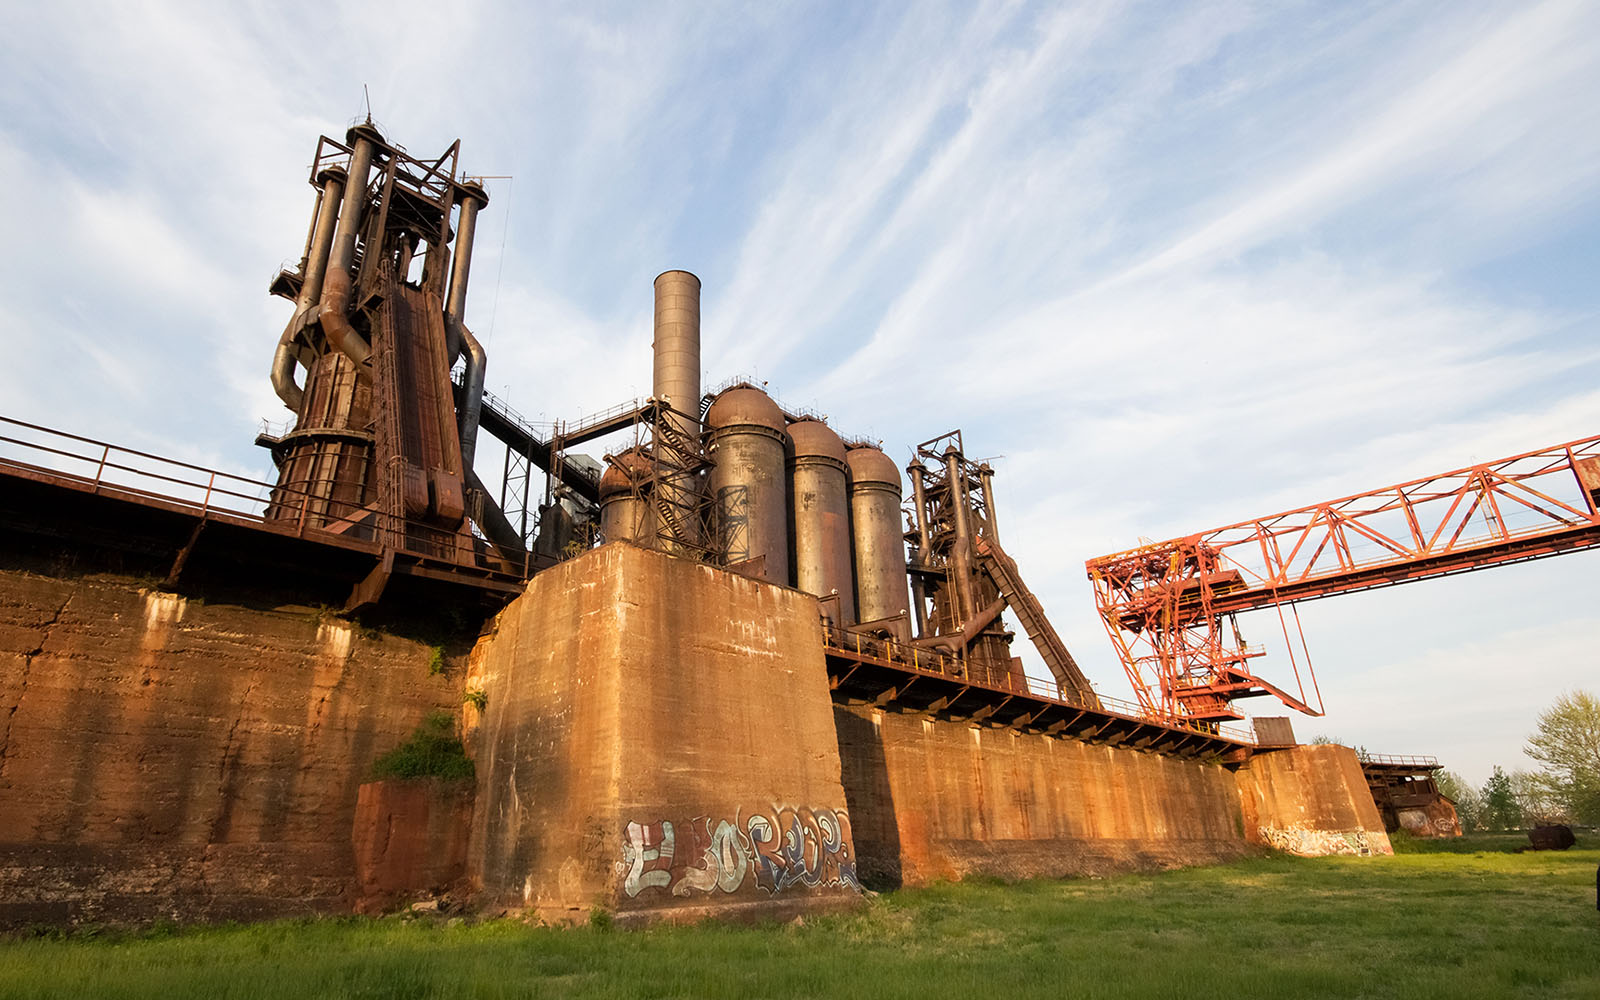 Golden Hour image of the Carrie Furnaces